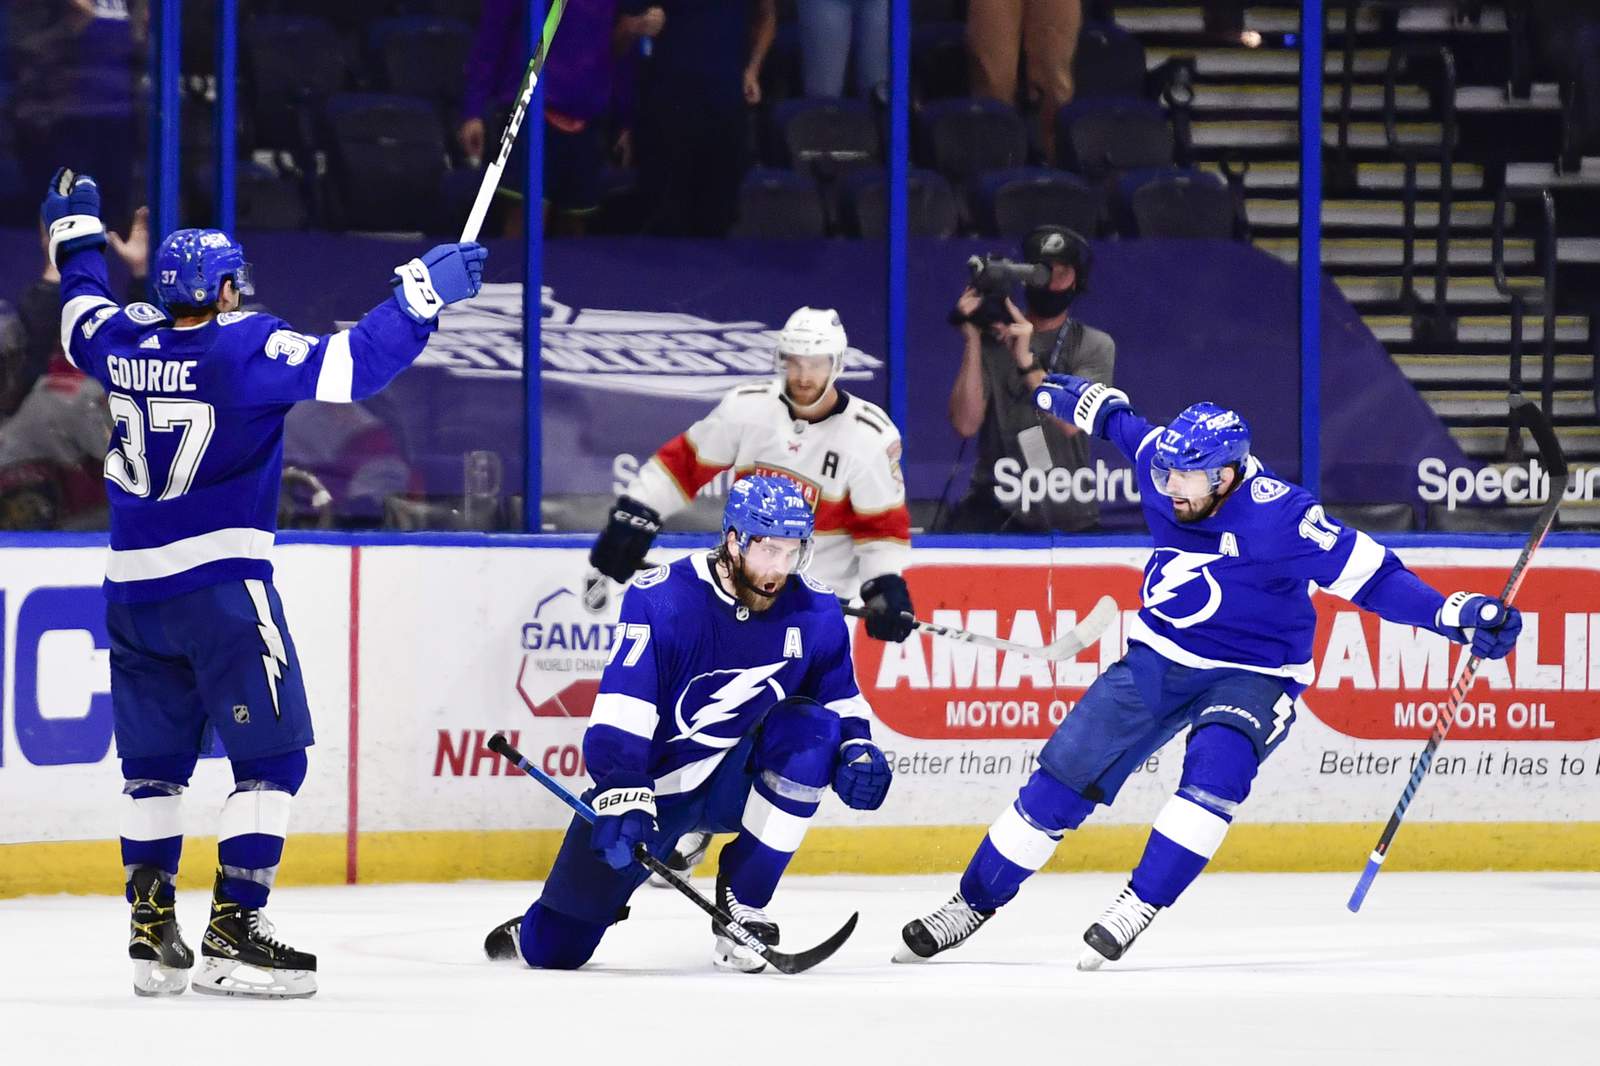 Hedman scores in OT to give Lightning 3-2 win over Panthers